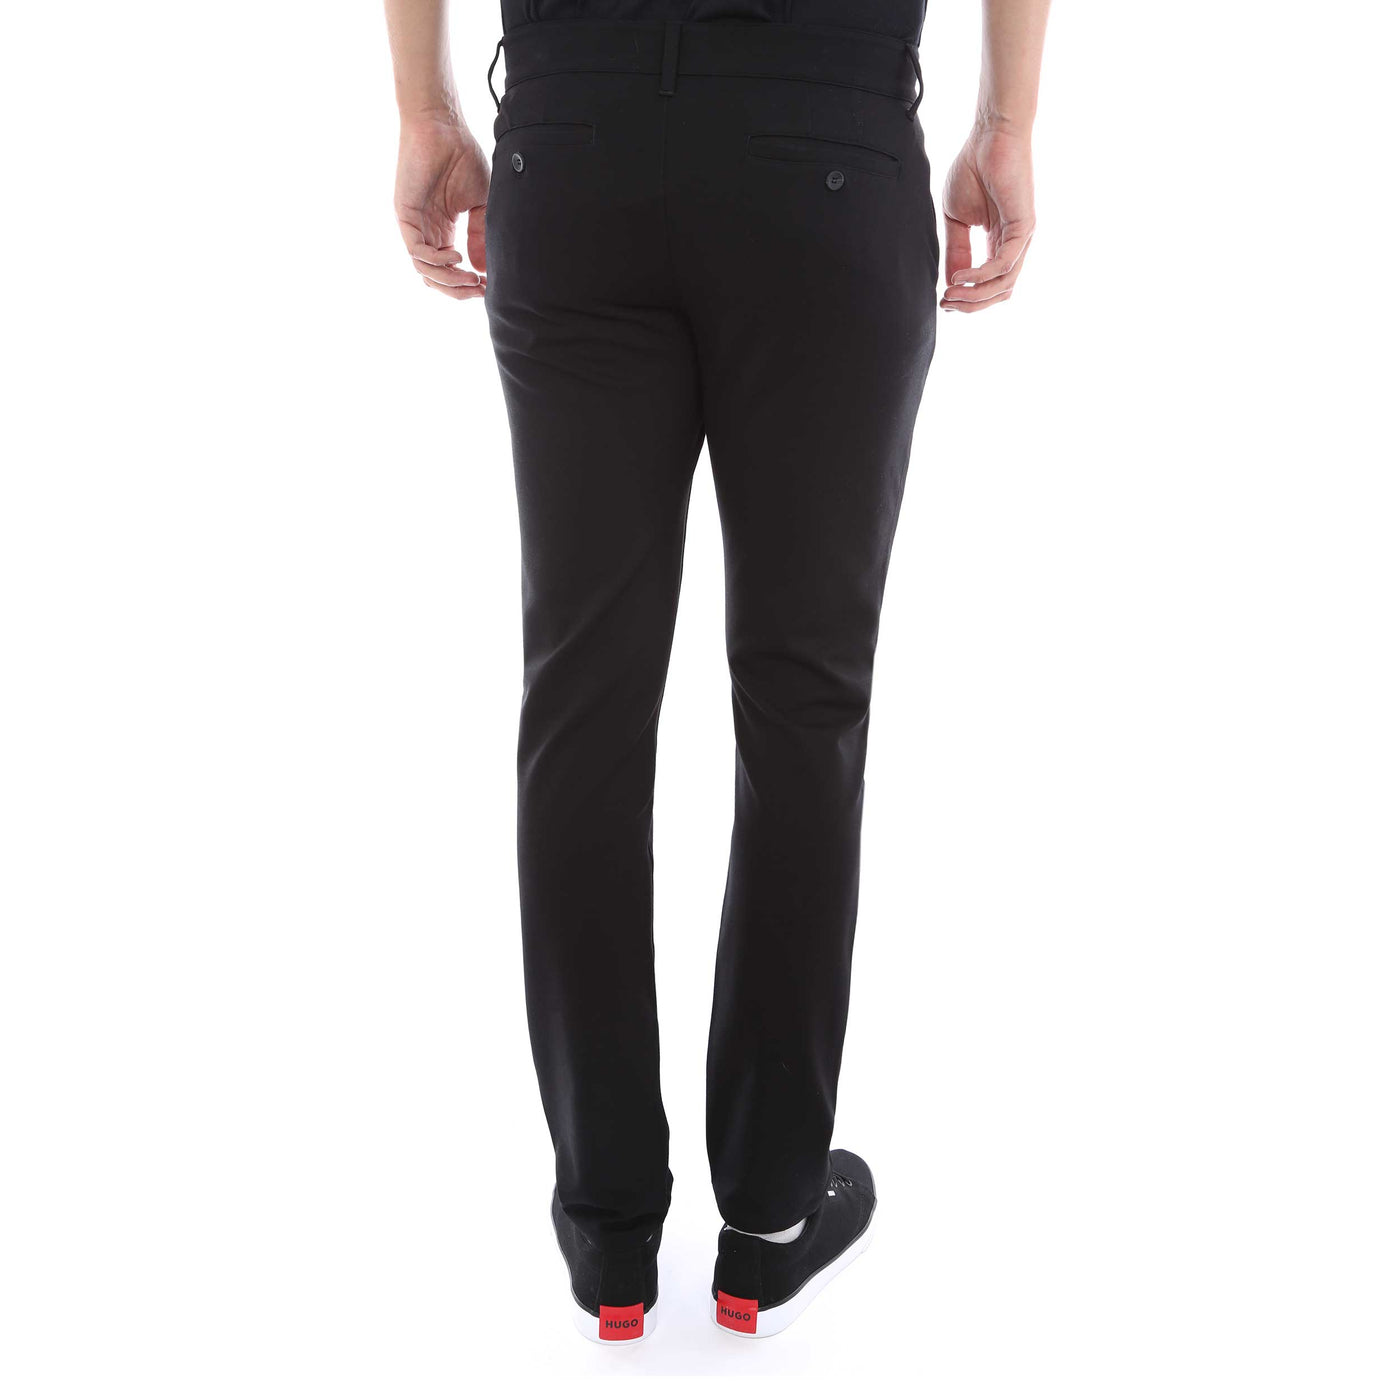 Paige Stafford Trouser in Black Back